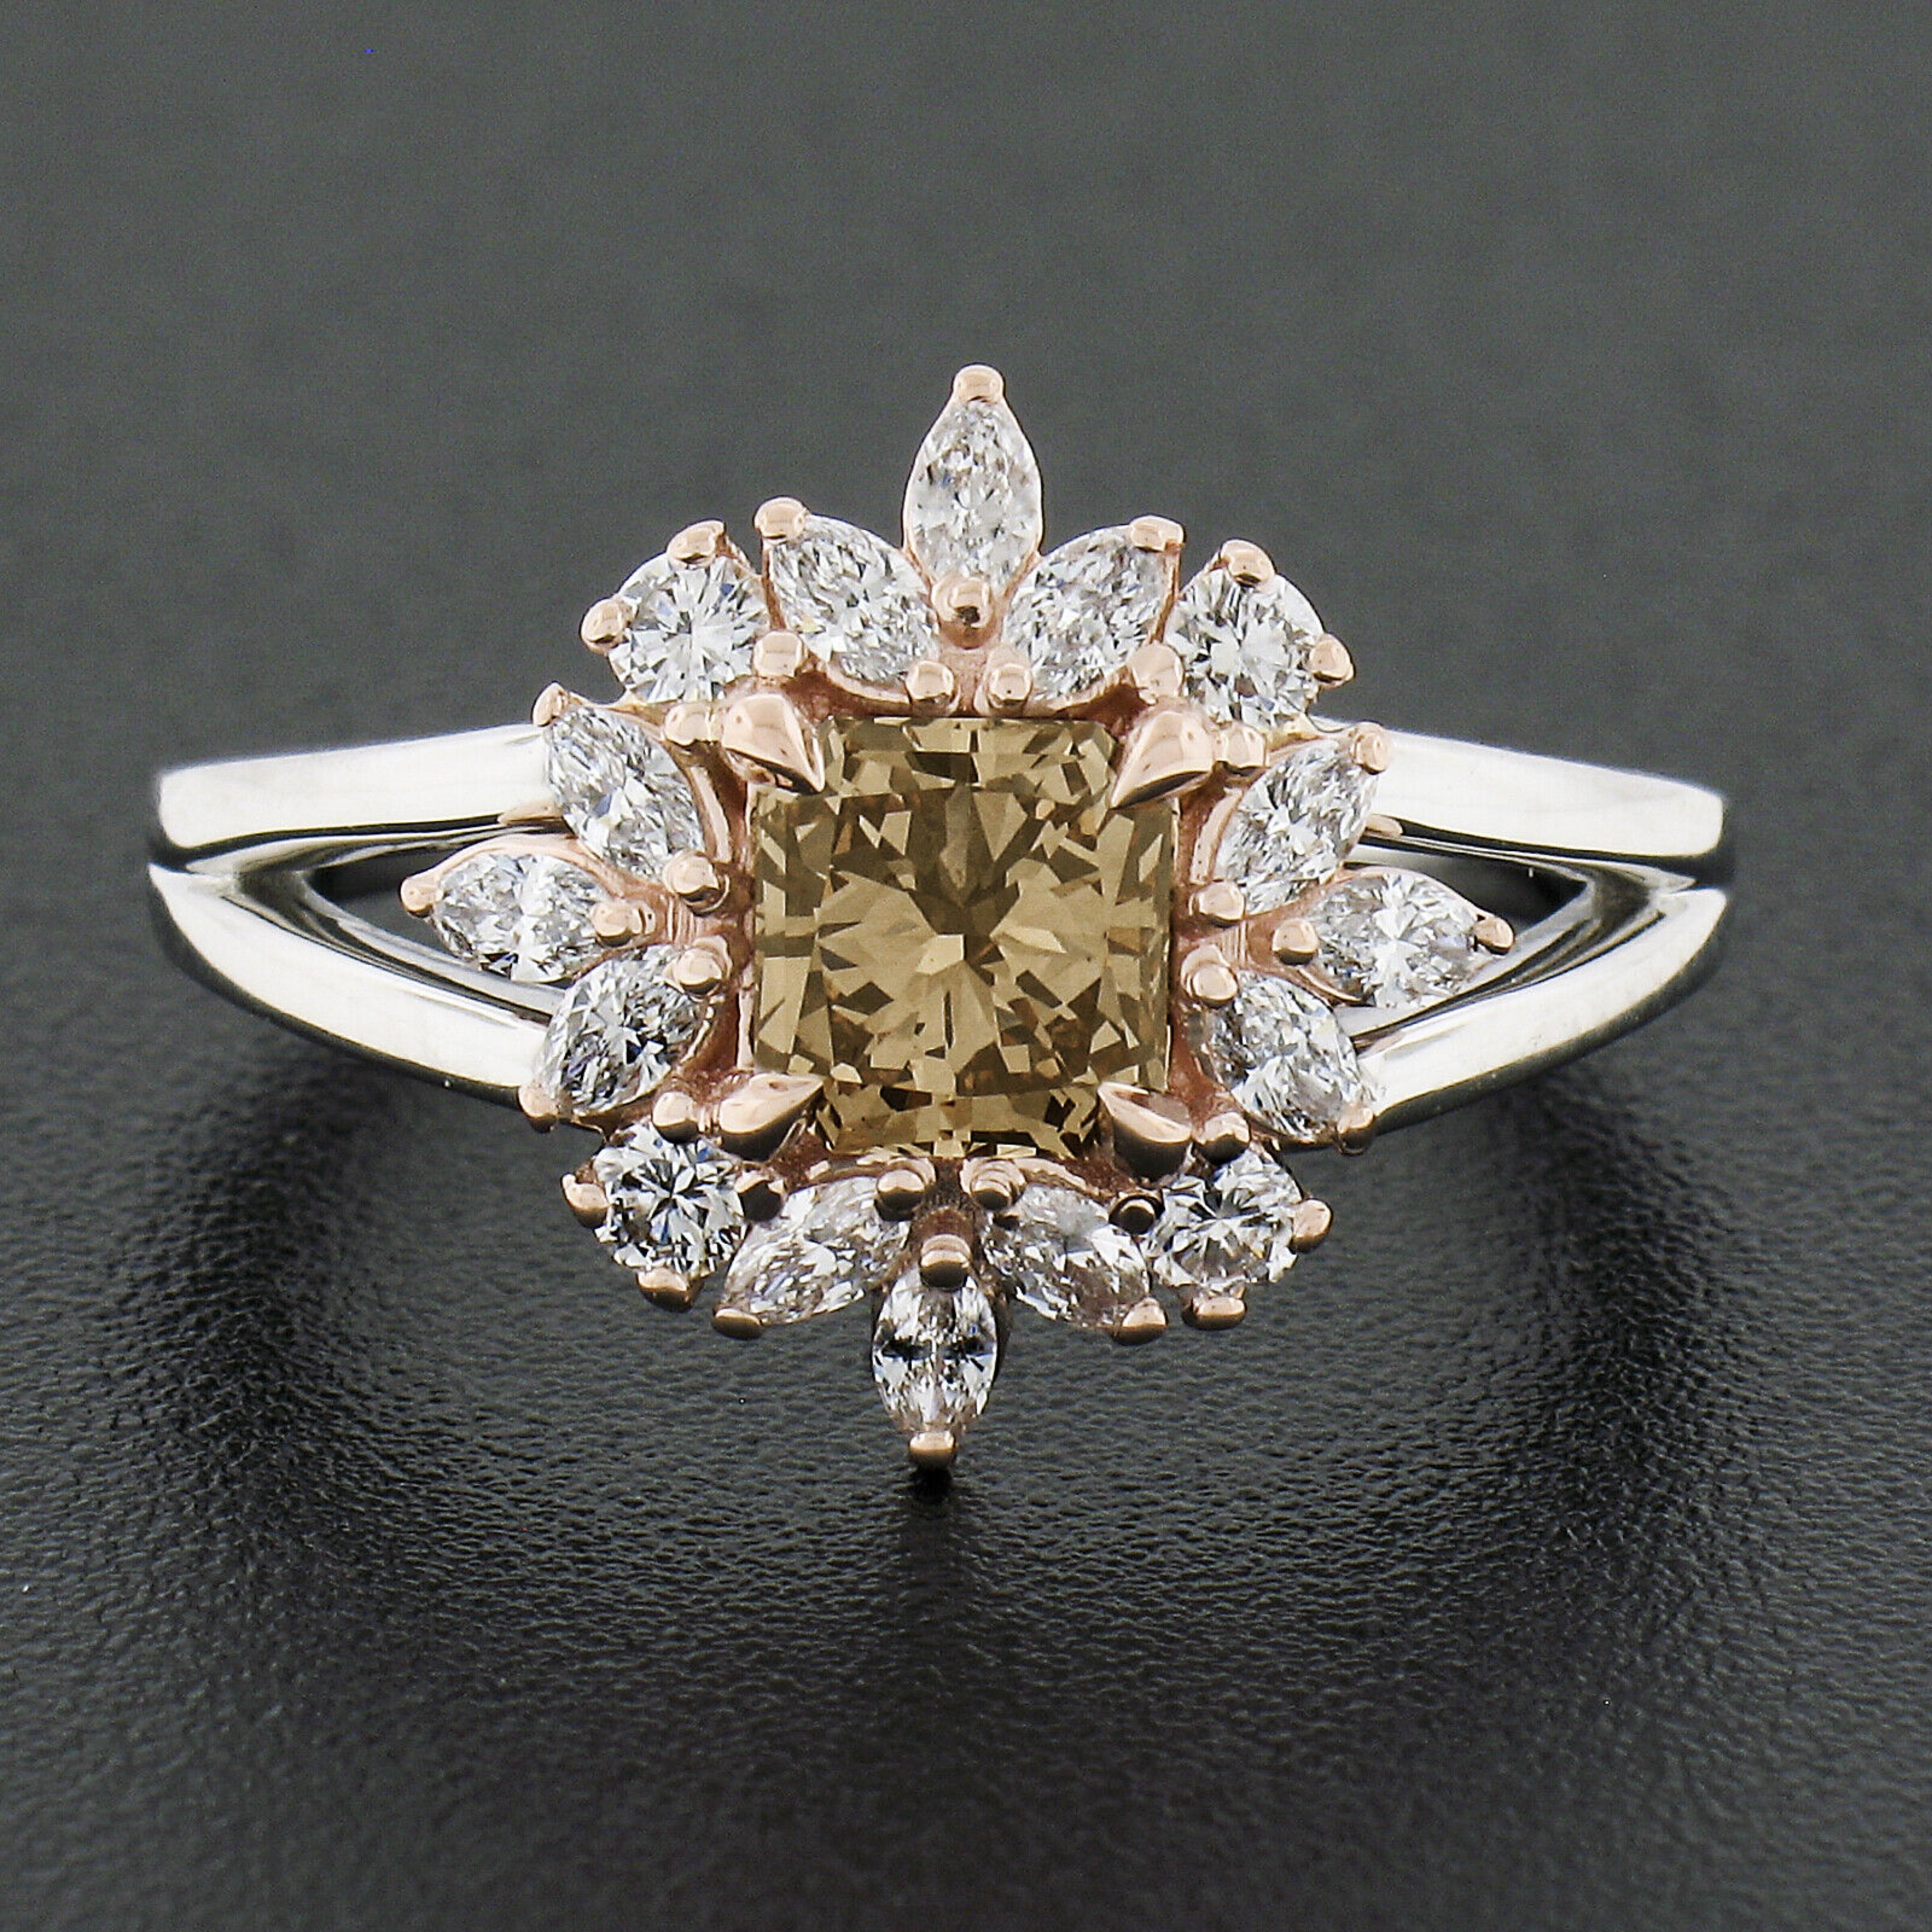 This gorgeous, custom made, diamond ring is newly crafted in solid platinum with a 14k rose gold top and features an amazing, 0.78 carat, GIA certified radiant cut diamond neatly prong set at its center. This incredible stone has natural, fancy dark